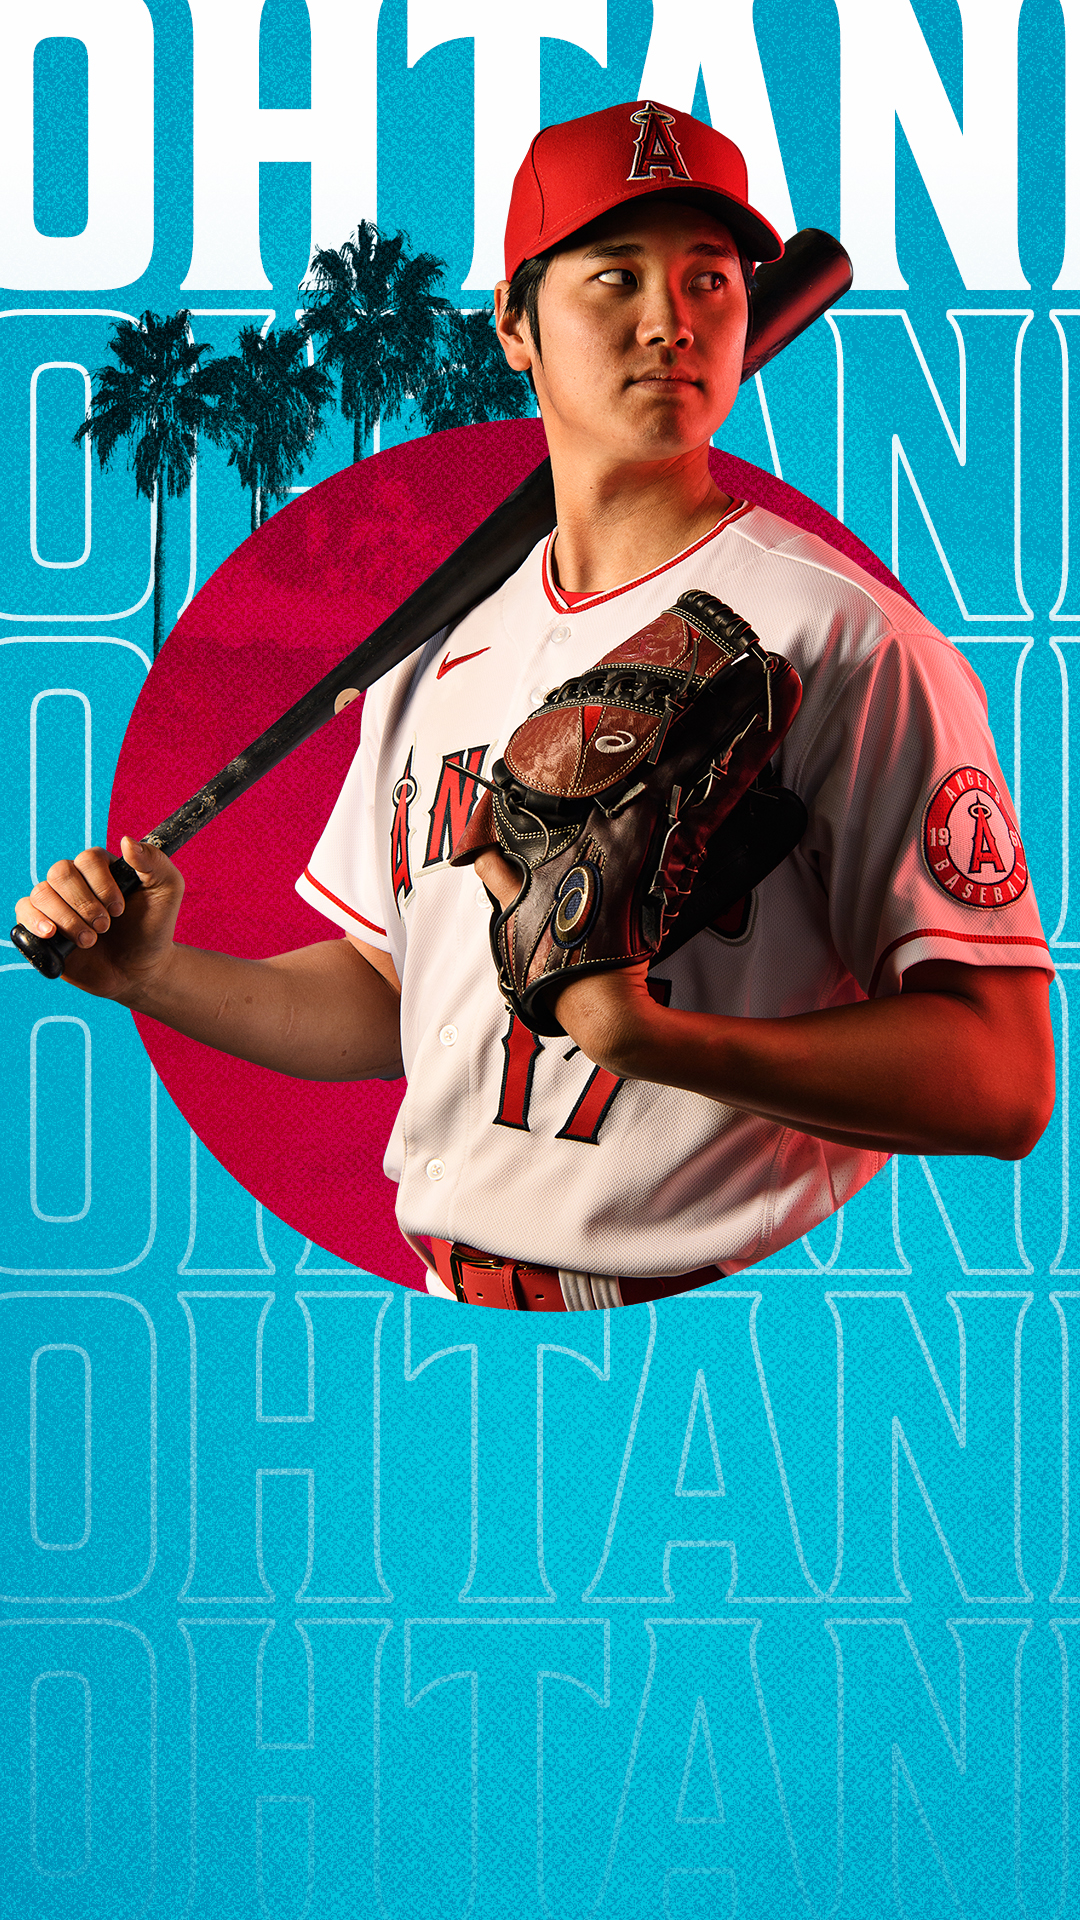 The Impossible Mystery of Shohei Ohtani  The Ringer